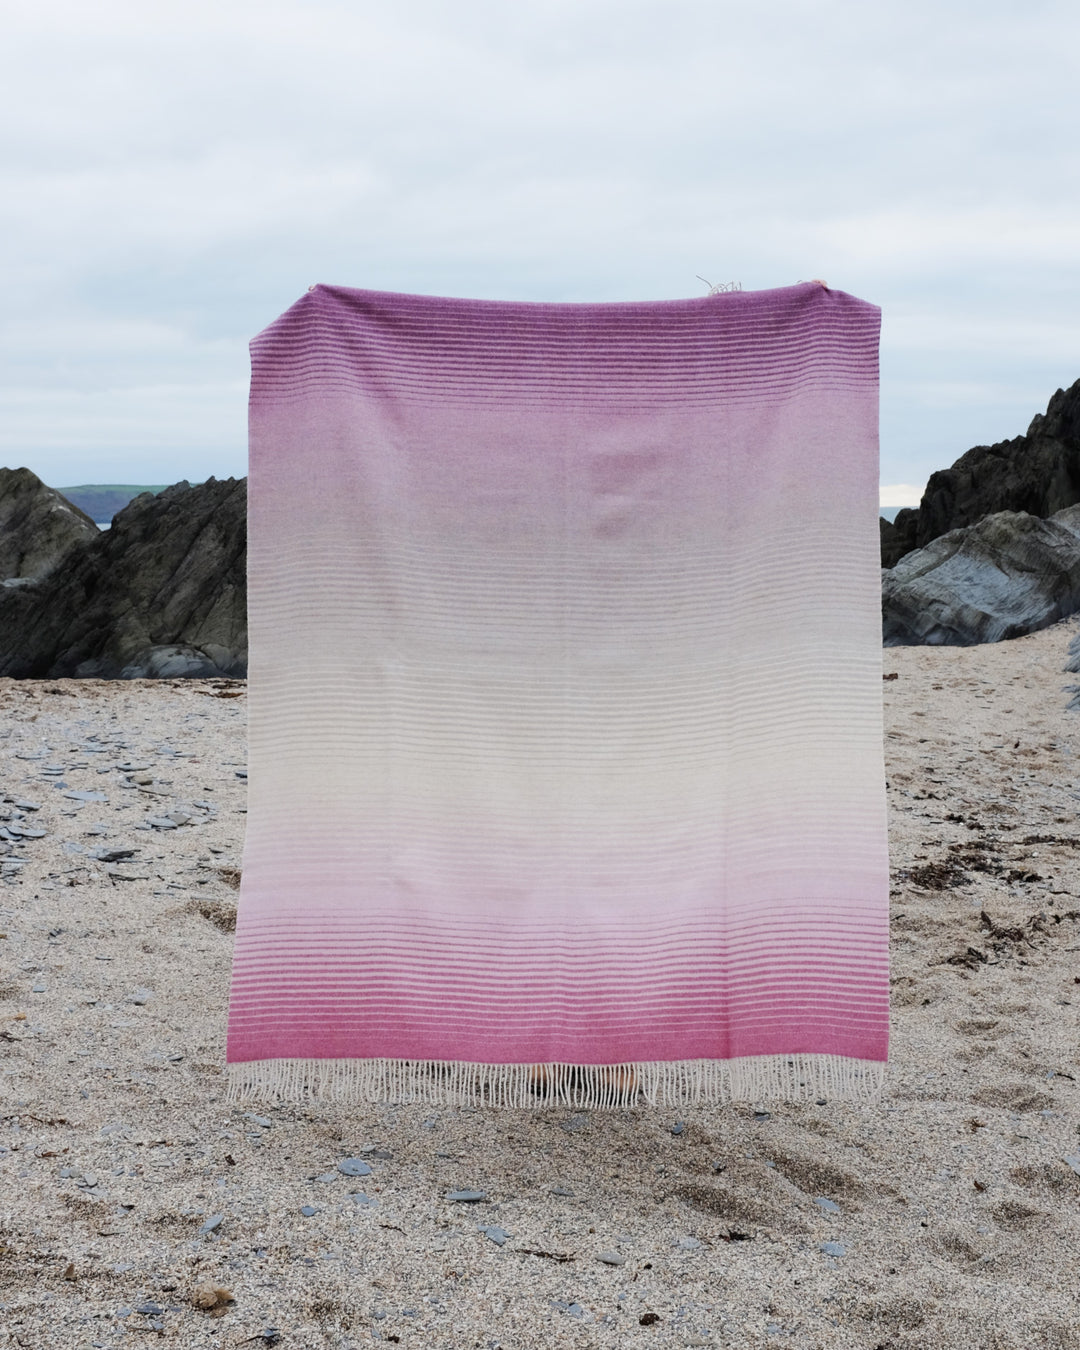 A person holding up a large pink ombre merino wool throw